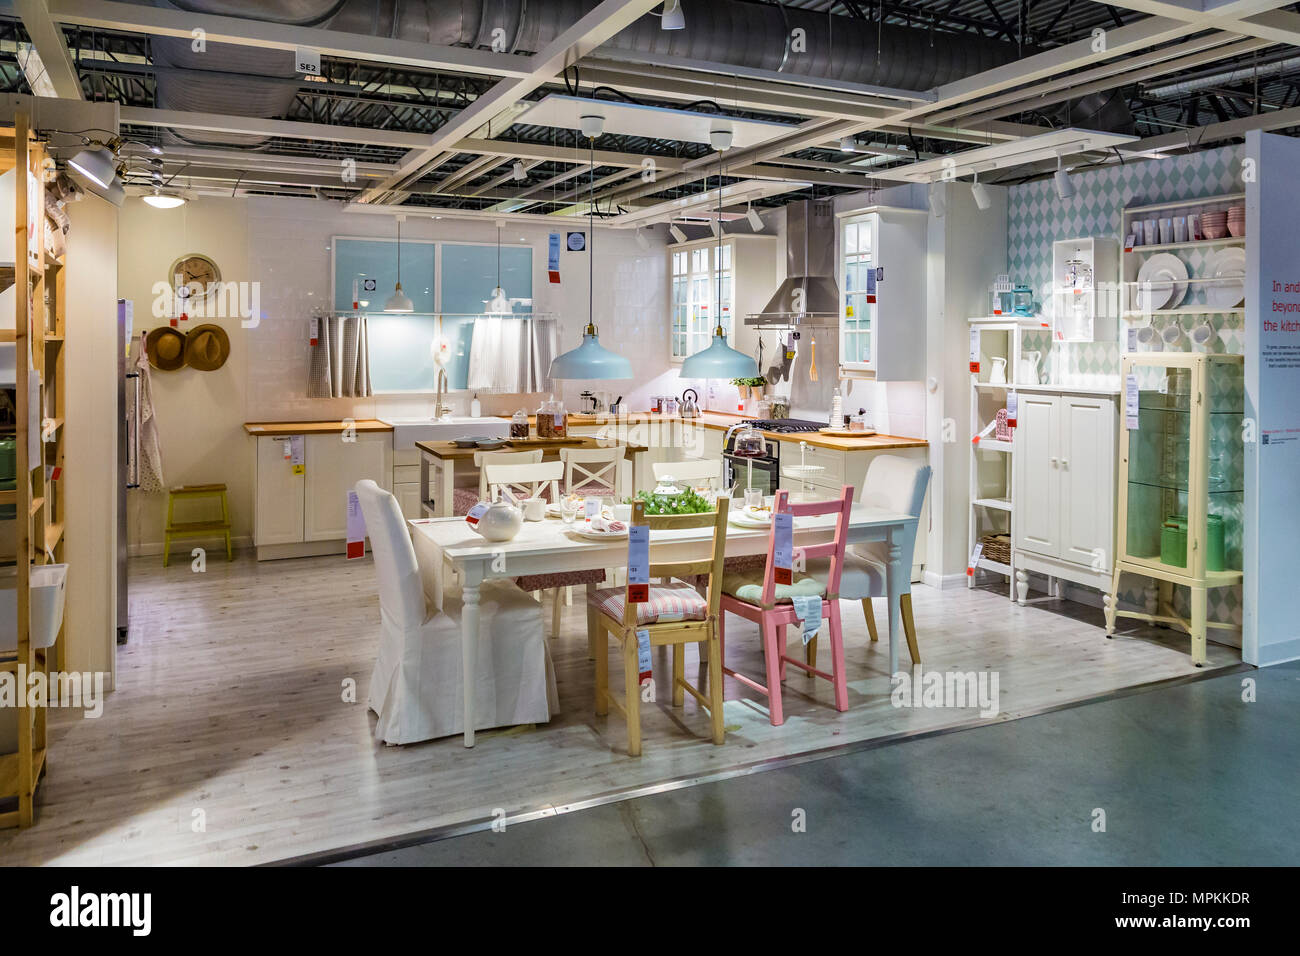 Sample kitchen design layout in showroom inside an Ikea store in the US Stock Photo